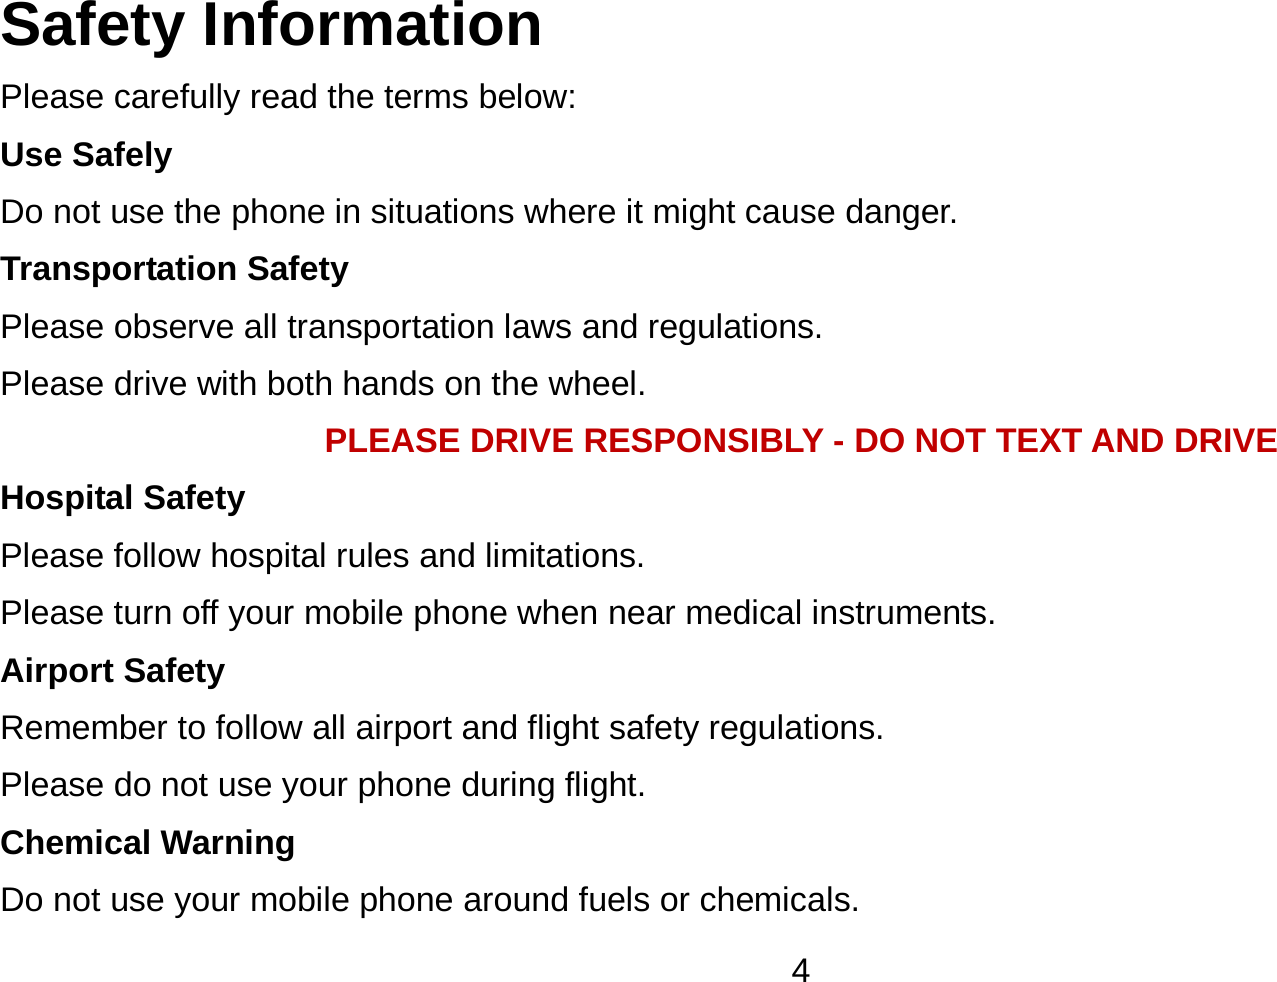   4Safety Information Please carefully read the terms below: Use Safely Do not use the phone in situations where it might cause danger. Transportation Safety Please observe all transportation laws and regulations. Please drive with both hands on the wheel.   PLEASE DRIVE RESPONSIBLY - DO NOT TEXT AND DRIVE Hospital Safety Please follow hospital rules and limitations. Please turn off your mobile phone when near medical instruments. Airport Safety Remember to follow all airport and flight safety regulations.   Please do not use your phone during flight. Chemical Warning Do not use your mobile phone around fuels or chemicals. 